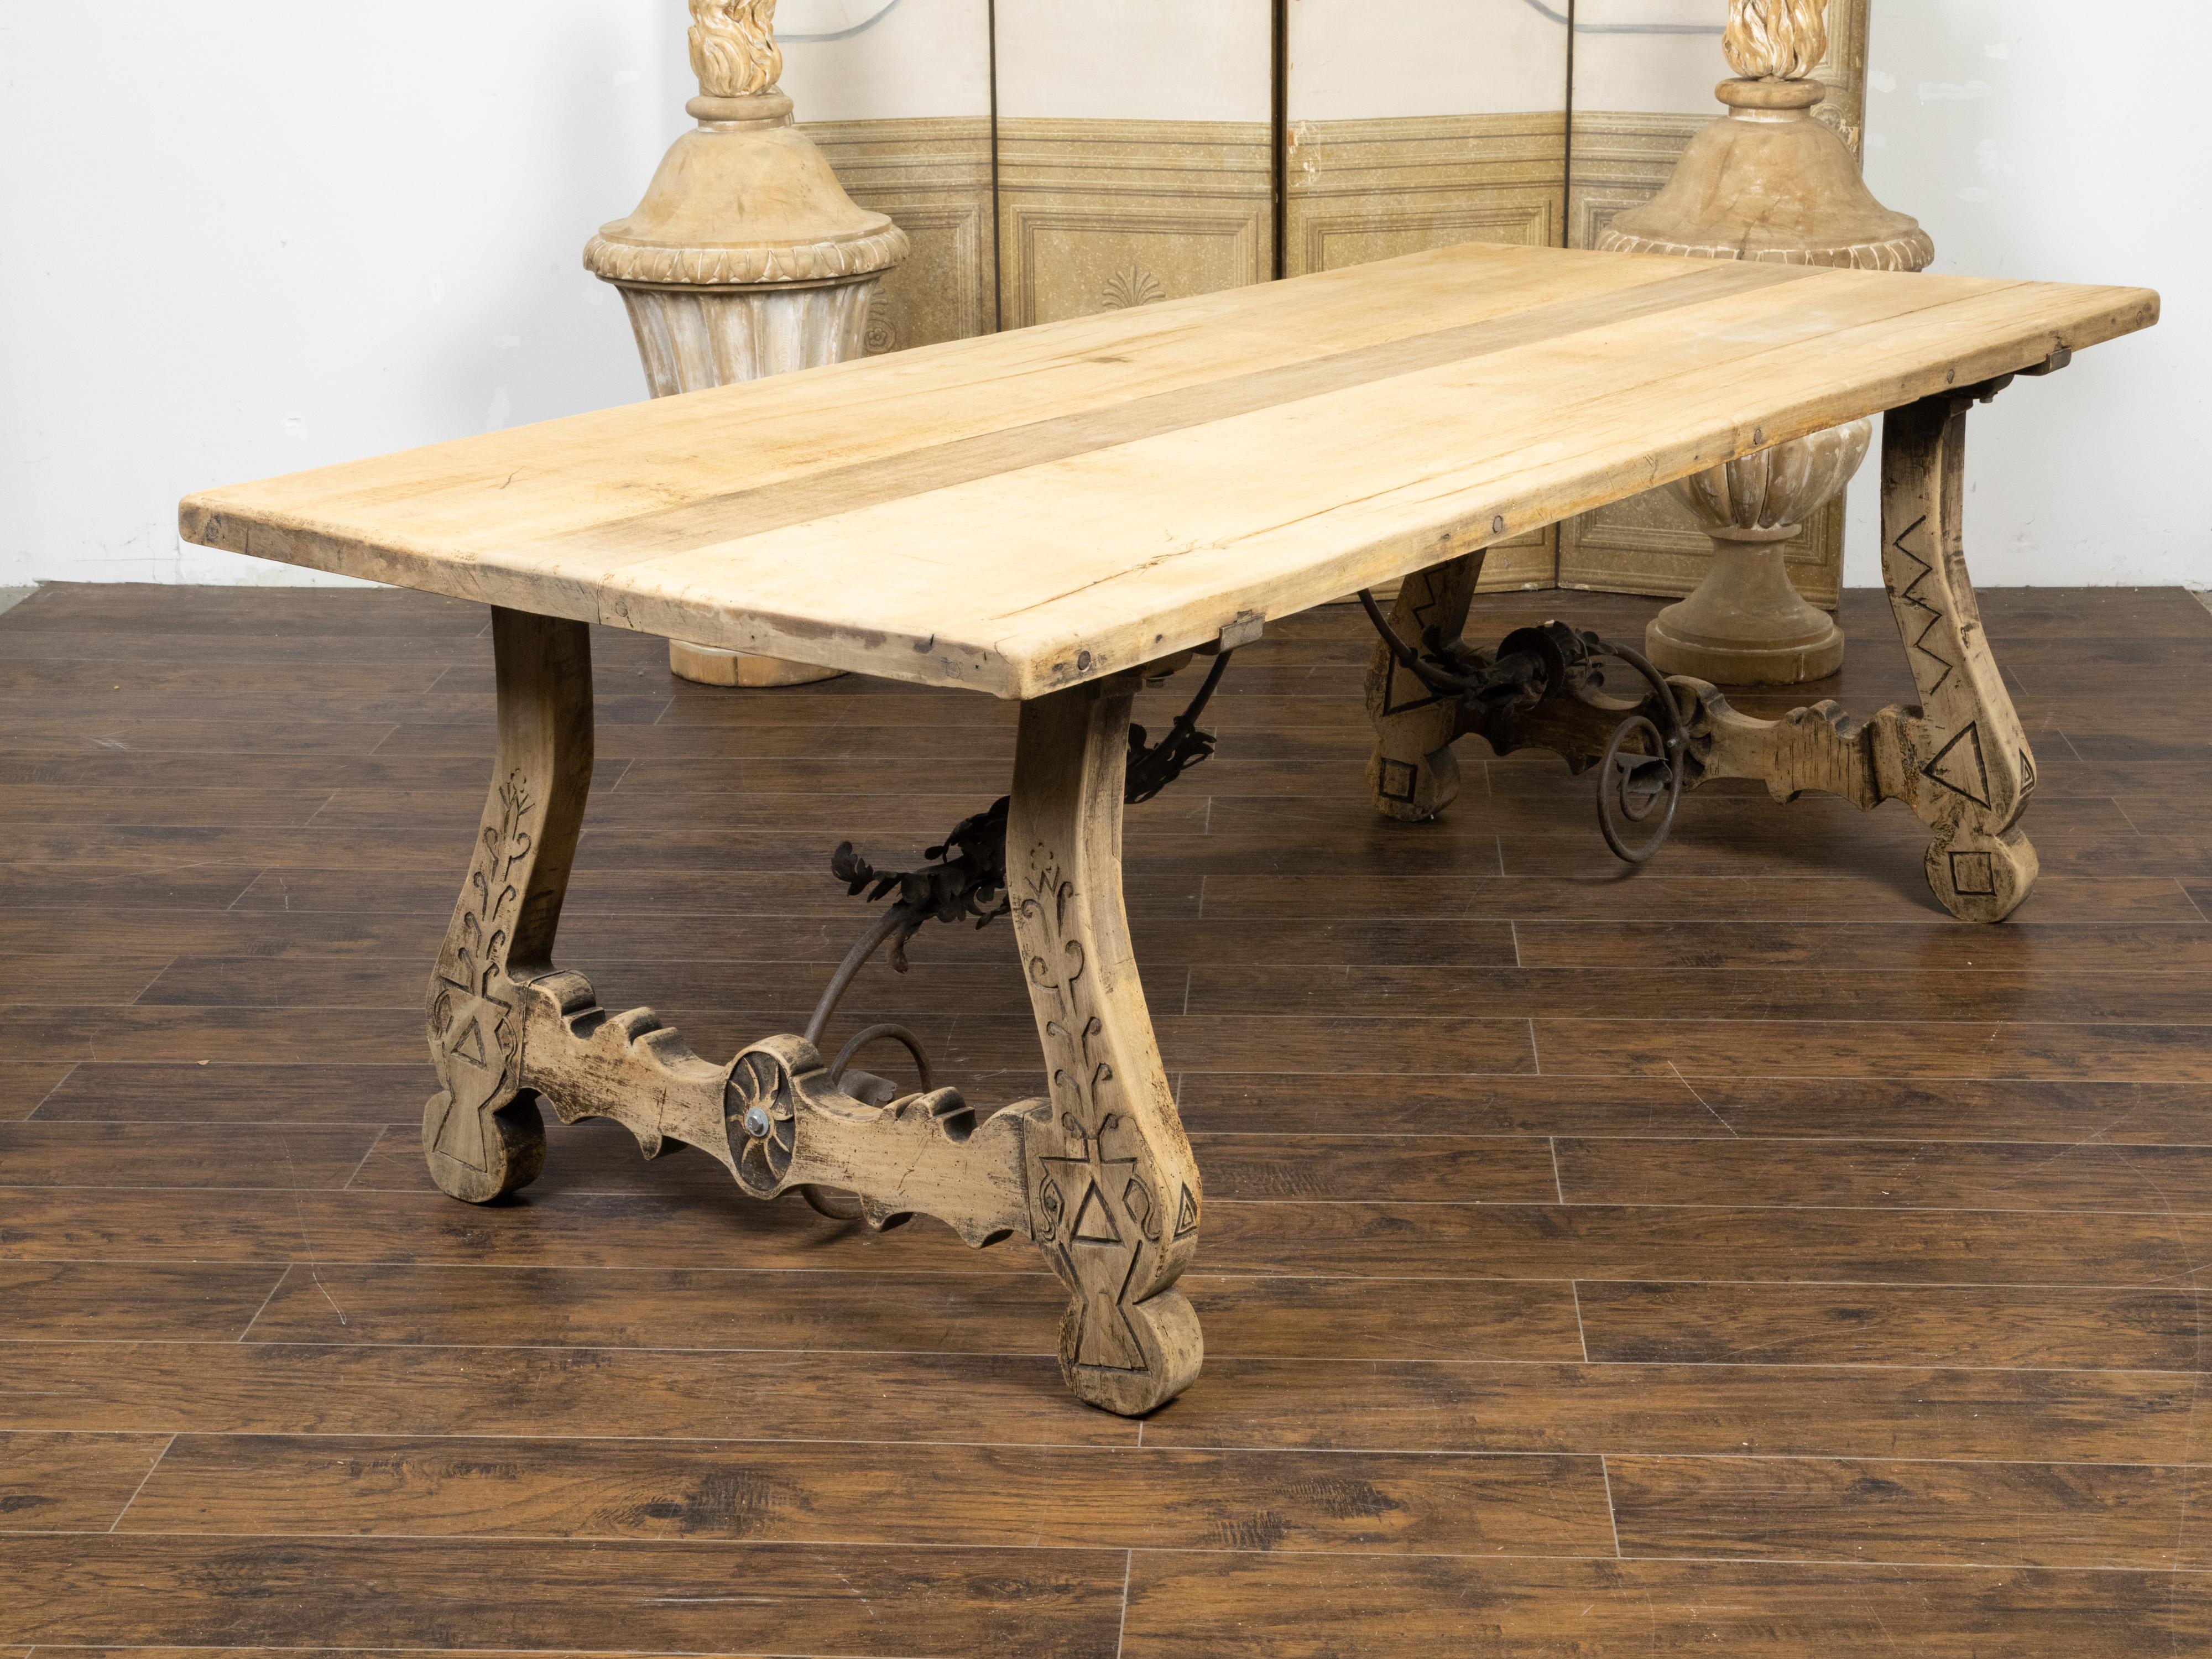 An Italian bleached oak farm table from the 19th century, with Baroque style base, incised carved floral and geometric décor and wrought iron scrolling stretchers. Created in Italy during the 19th century, this farm table features a bleached oak